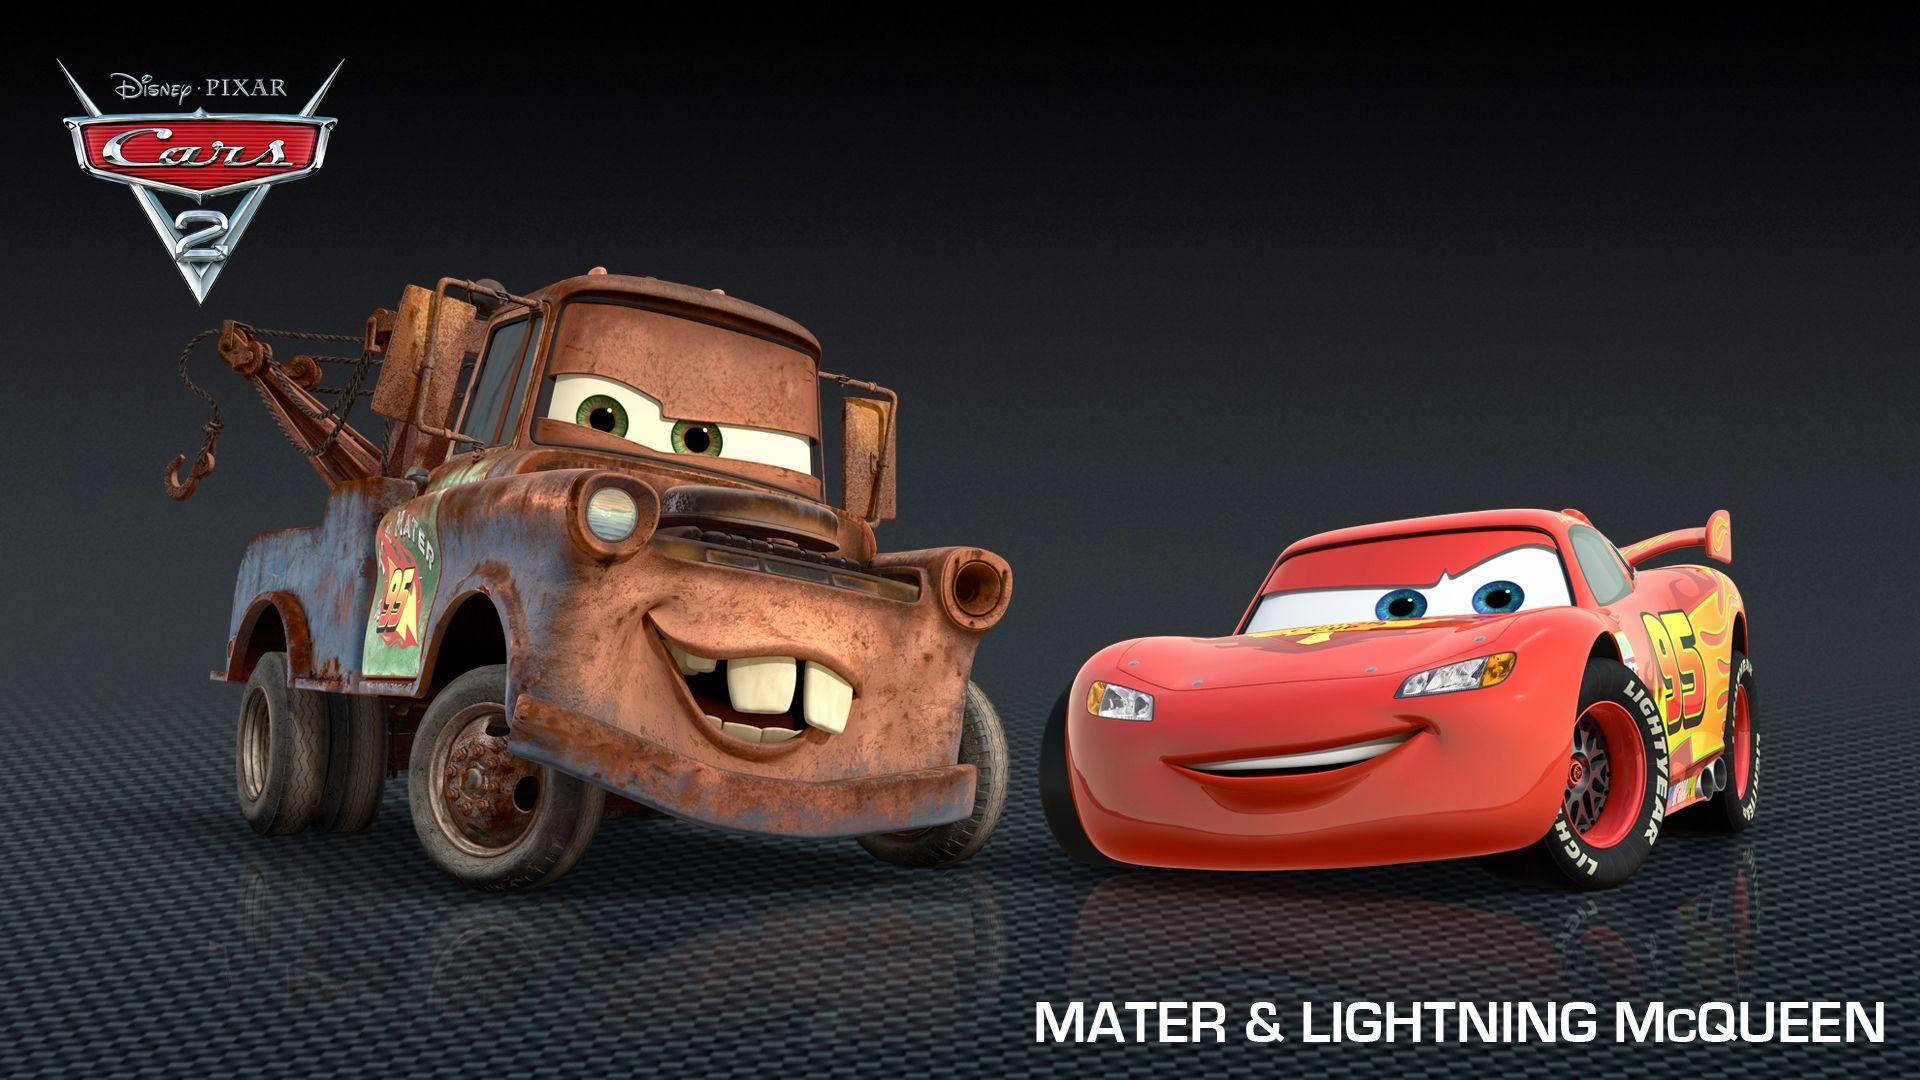 Disney 1920x1080 Hd Cars Lightning Mcqueen And Mater Picture